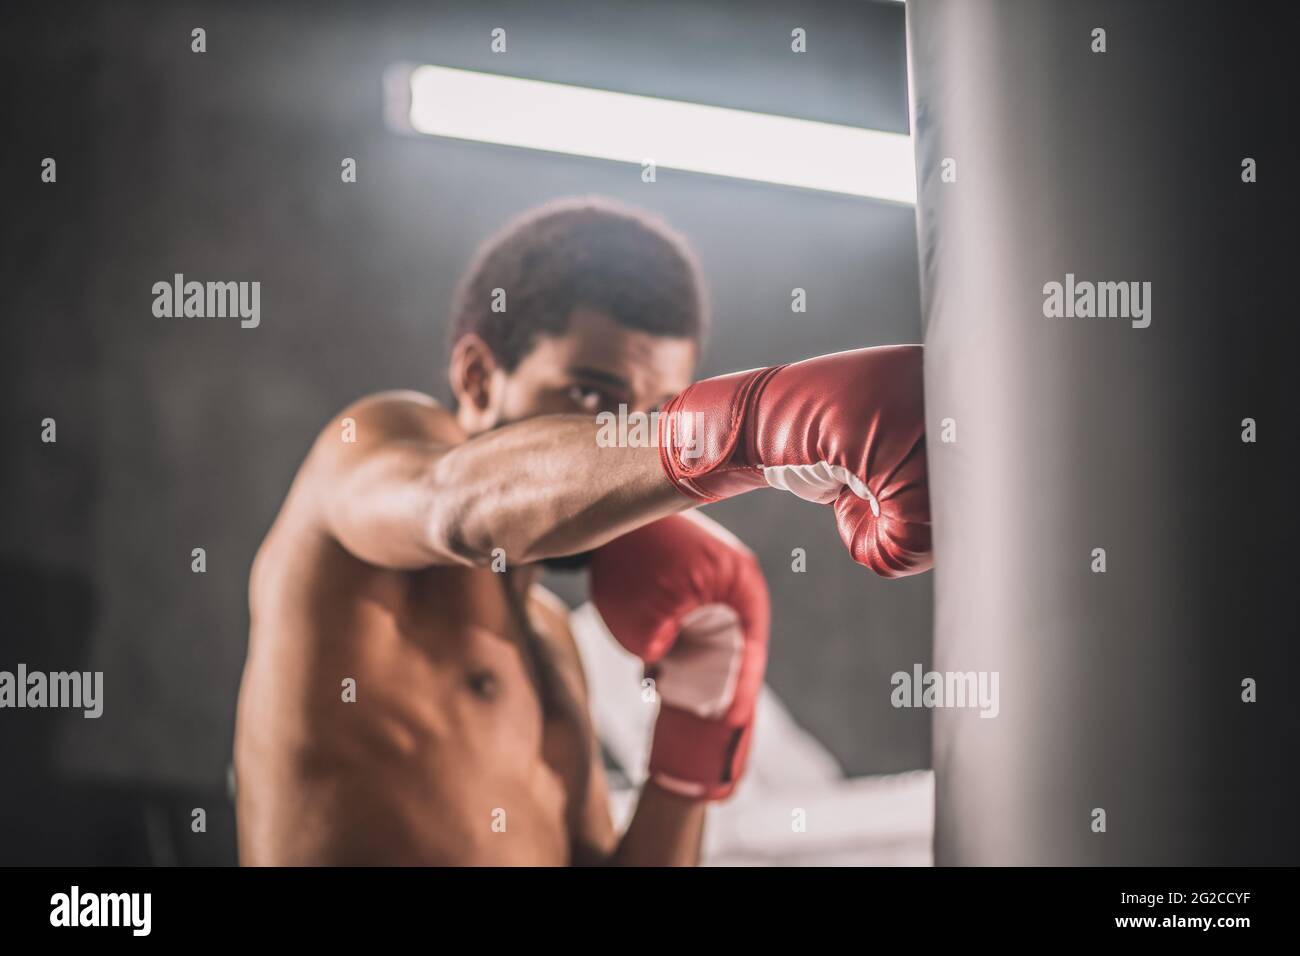 Dark-skinned kickboxer having a workout in a gym and looking involved Stock Photo